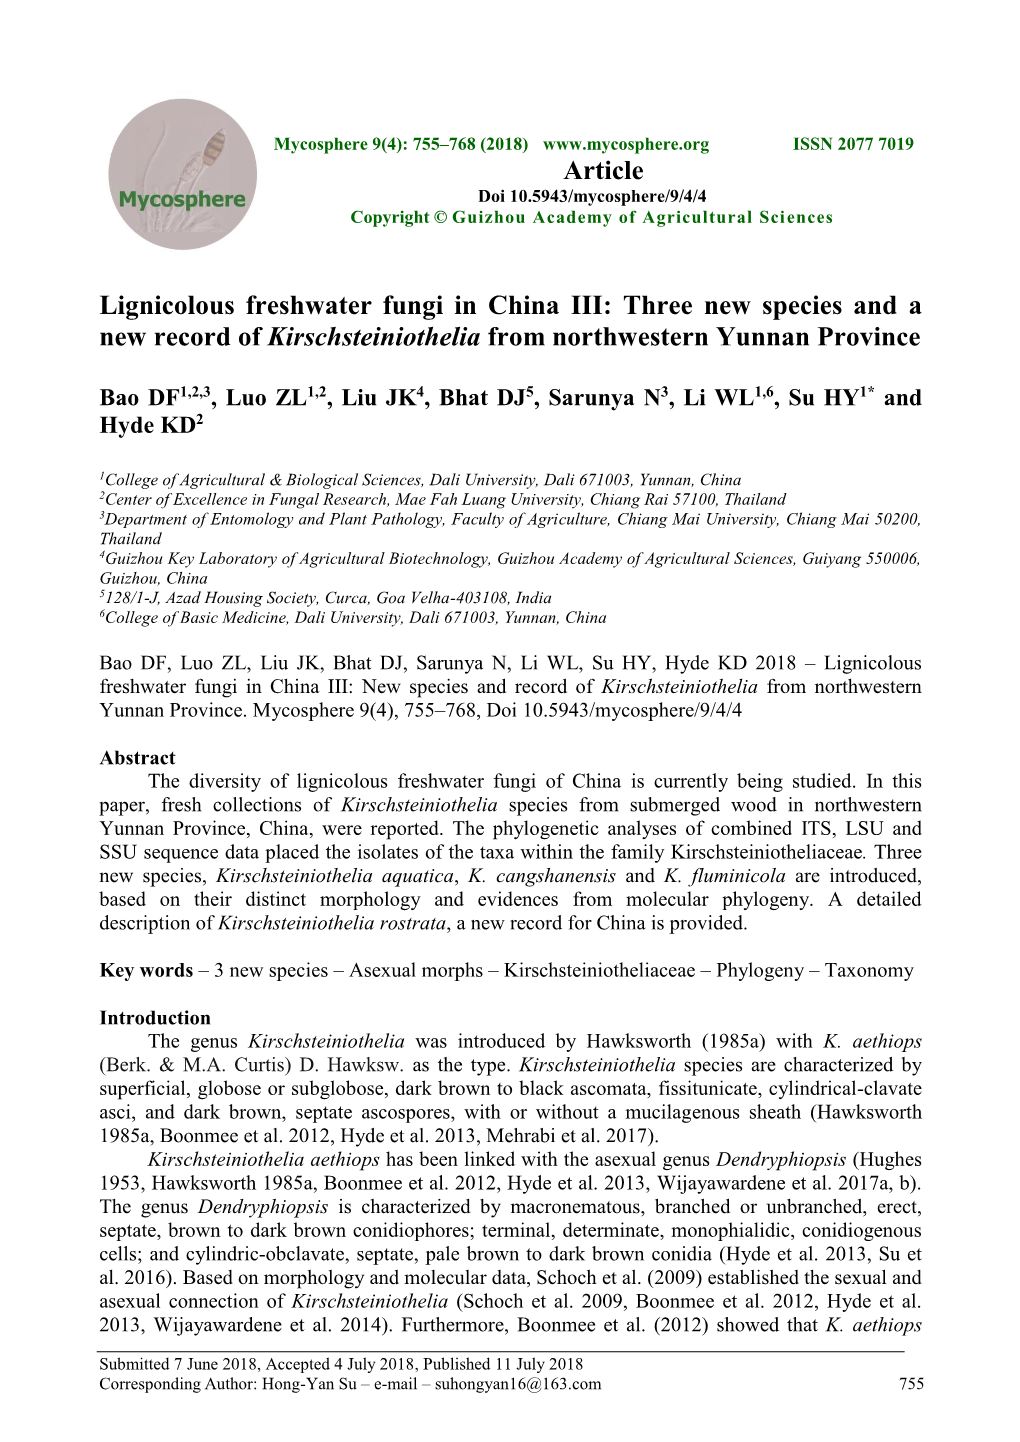 Lignicolous Freshwater Fungi in China III: Three New Species and a New Record of Kirschsteiniothelia from Northwestern Yunnan Province